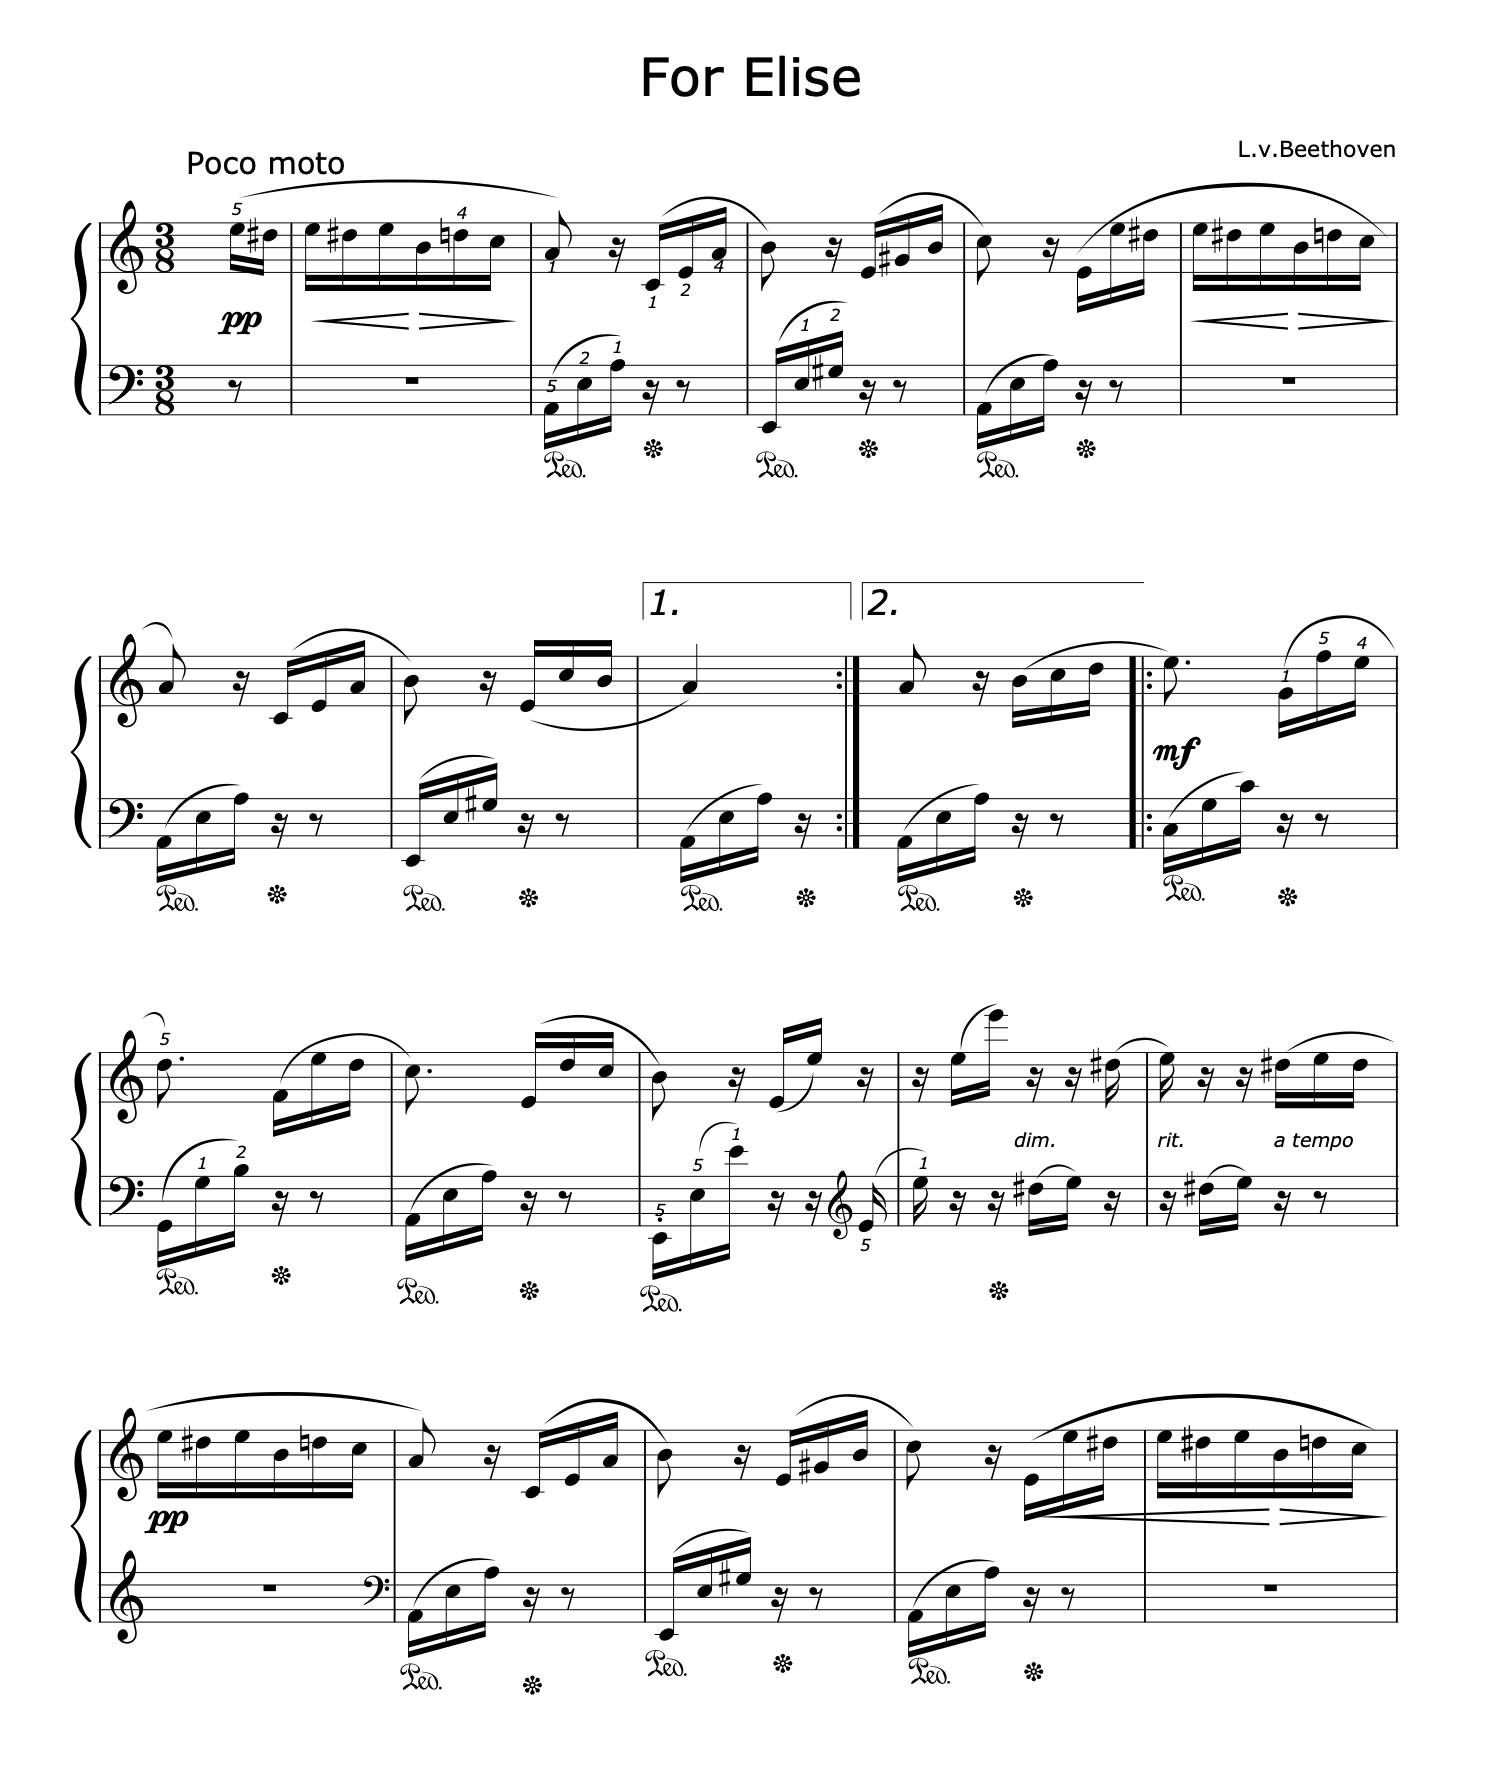 For Elise, by Beethoven